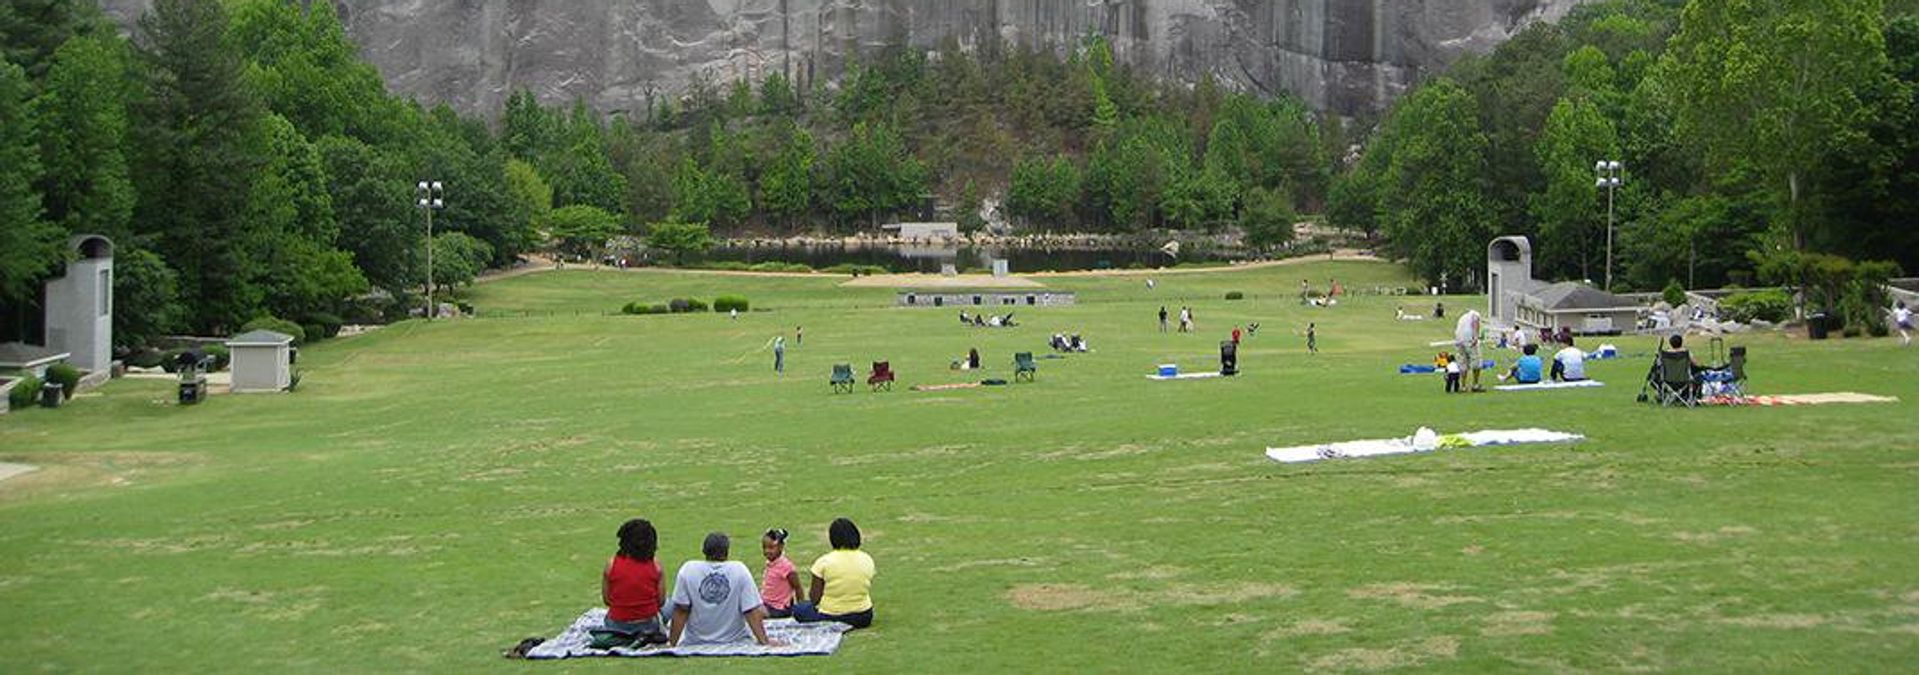 Stone Mountain Park outside Atlanta, says Brentin Mock, is just one American public space that was weaponized against Black people. Source: Wikimedia Commons.